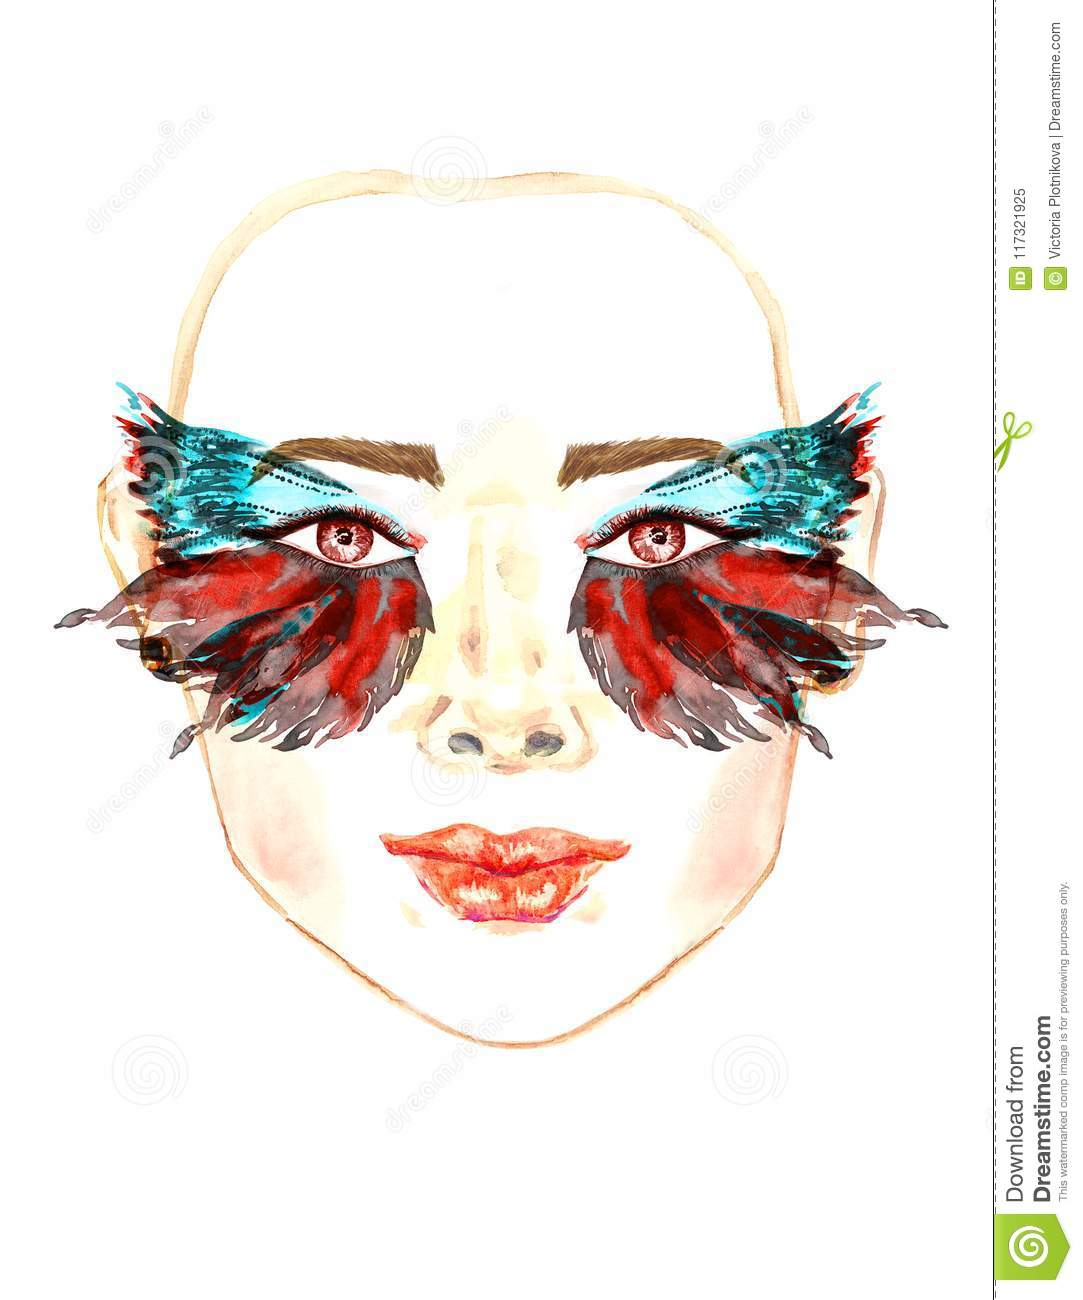 Fairy Eye Makeup Face With Red Fairy Eyes With Makeup Red And Green Turquoise Wings